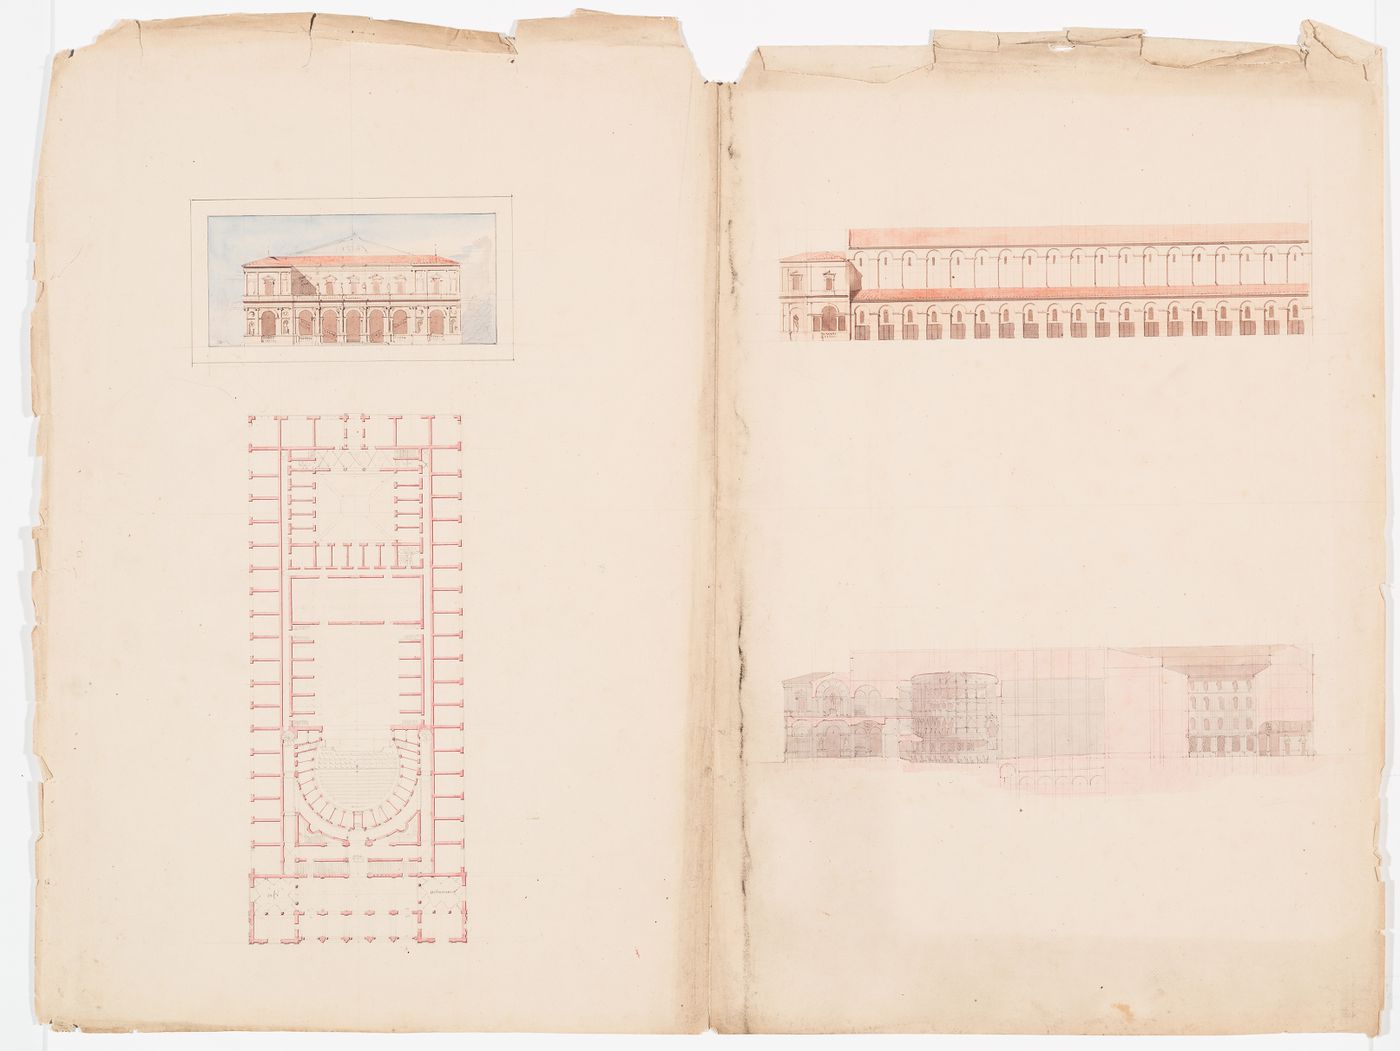 Plan, elevations, and longitudinal section for an opera house, probably for the Académie royale de musique